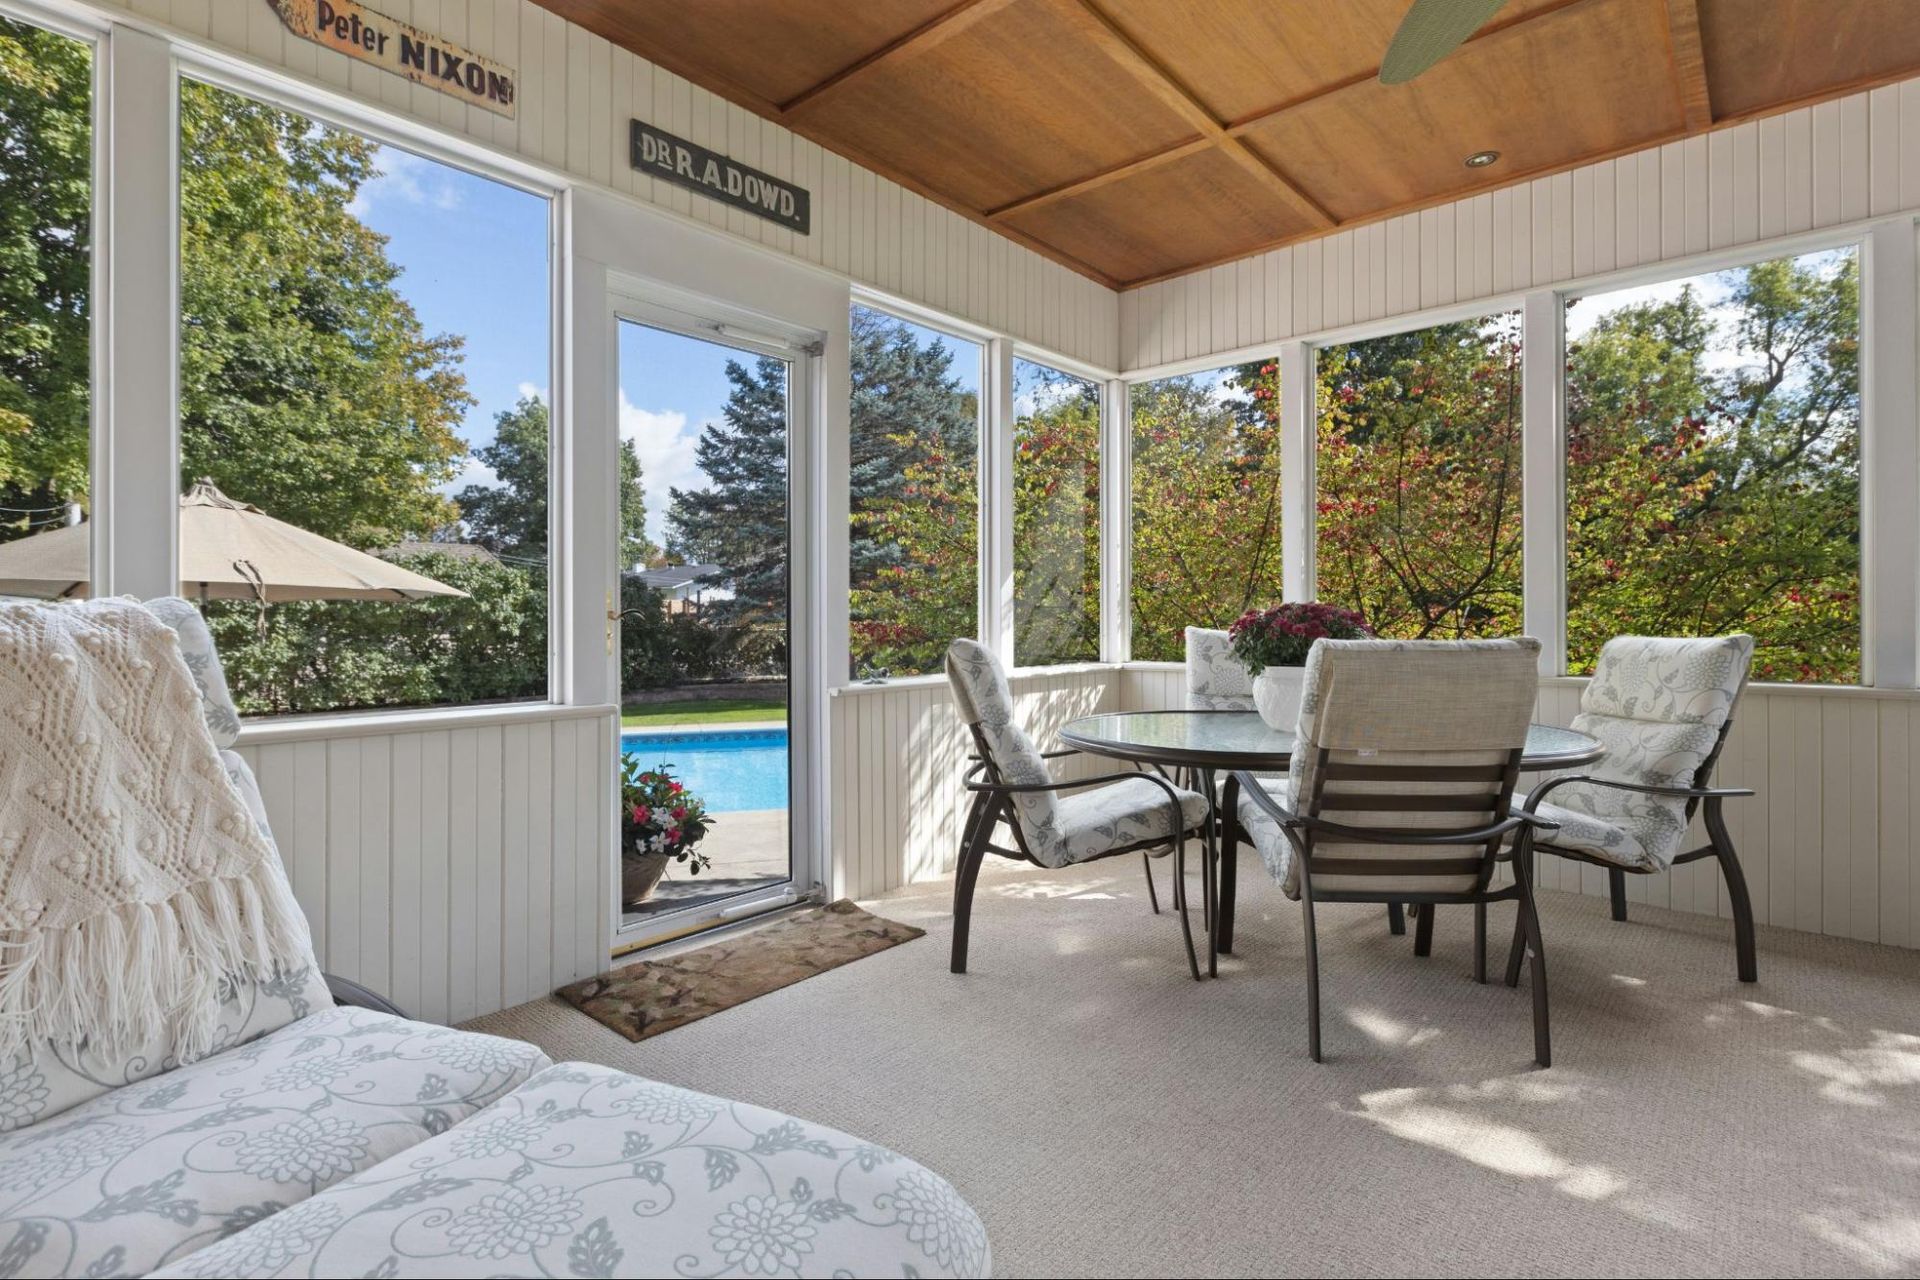 A screened in porch with a table and chairs and a pool in the background.